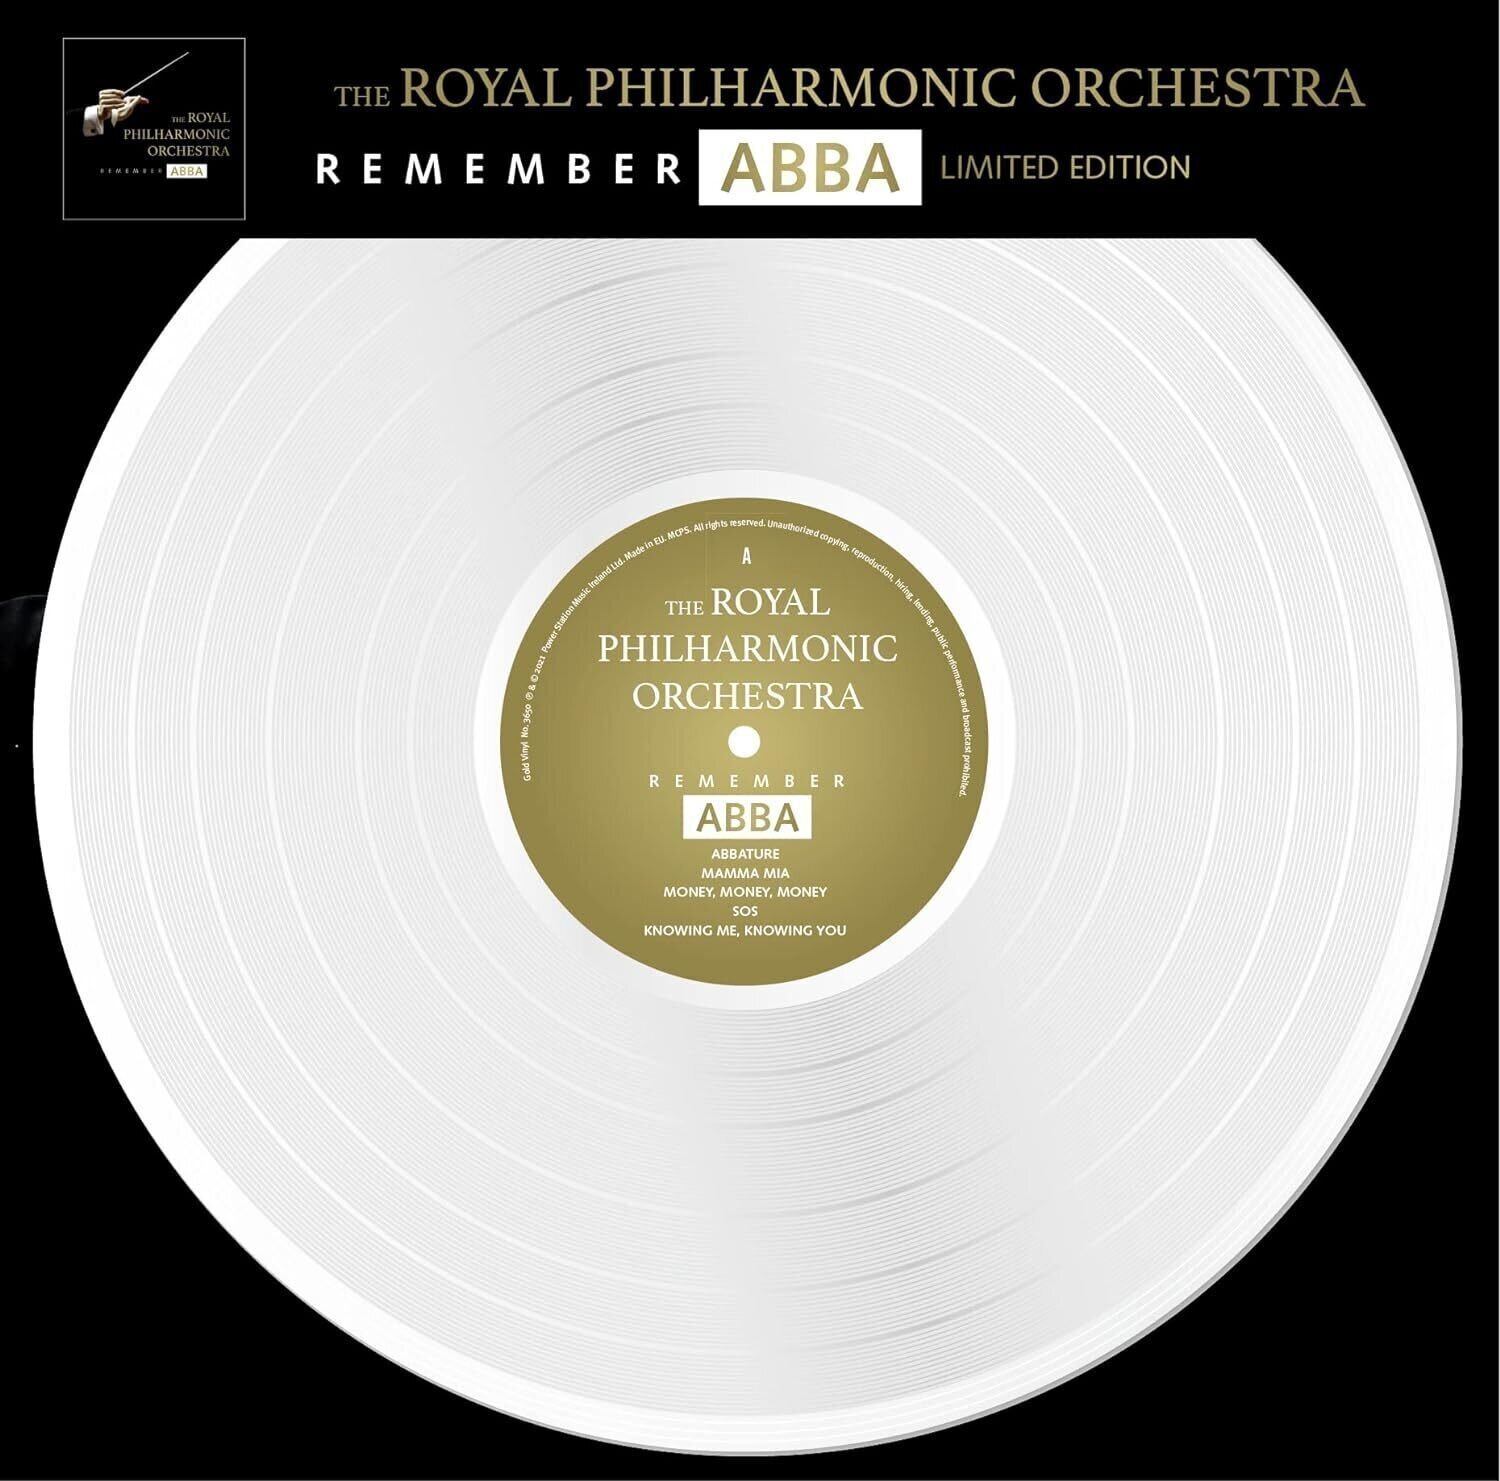 Disc de vinil Royal Philharmonic Orchestra - Remember ABBA (Limited Edition) (Numbered) (Reissue) (White Coloured) (LP)